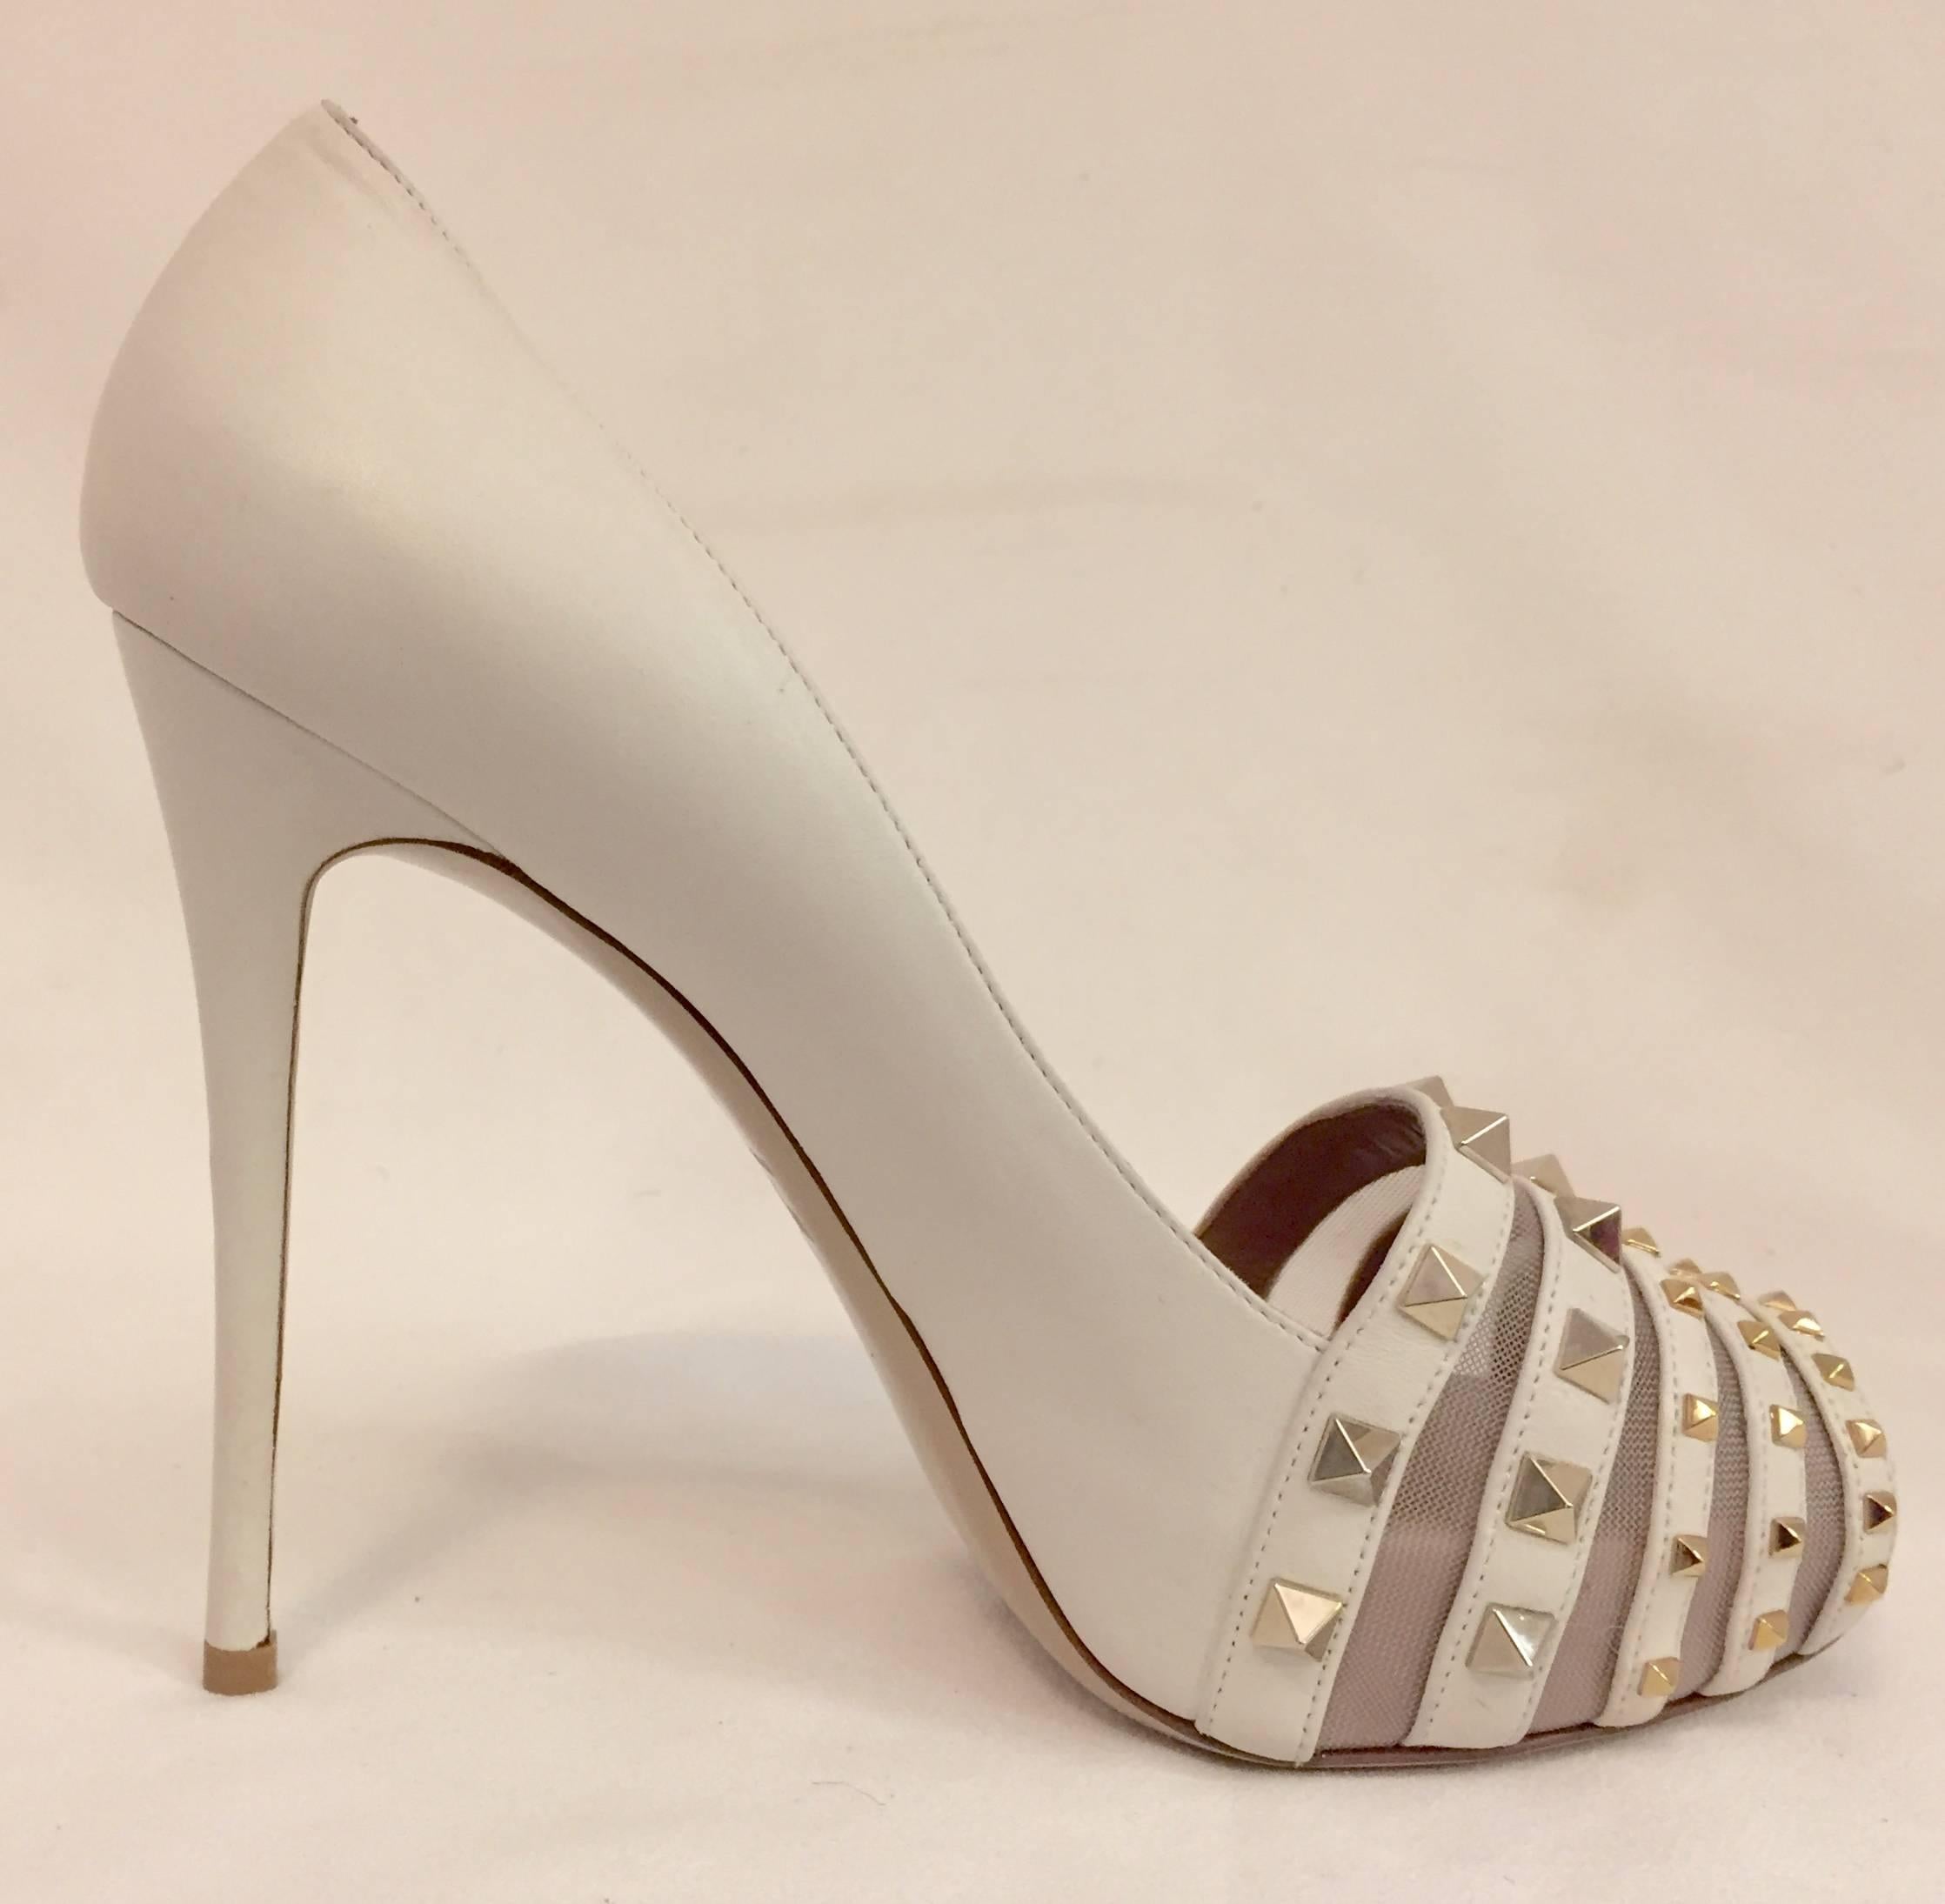 Rockstuds have become a signature Valentino Garavani flourish!  Highly prized ivory peep toe platform pumps are amplified with 5 leather bands alternating with ivory mesh between each band on the vamps.  The "kicker"?   Rockstuds adorn